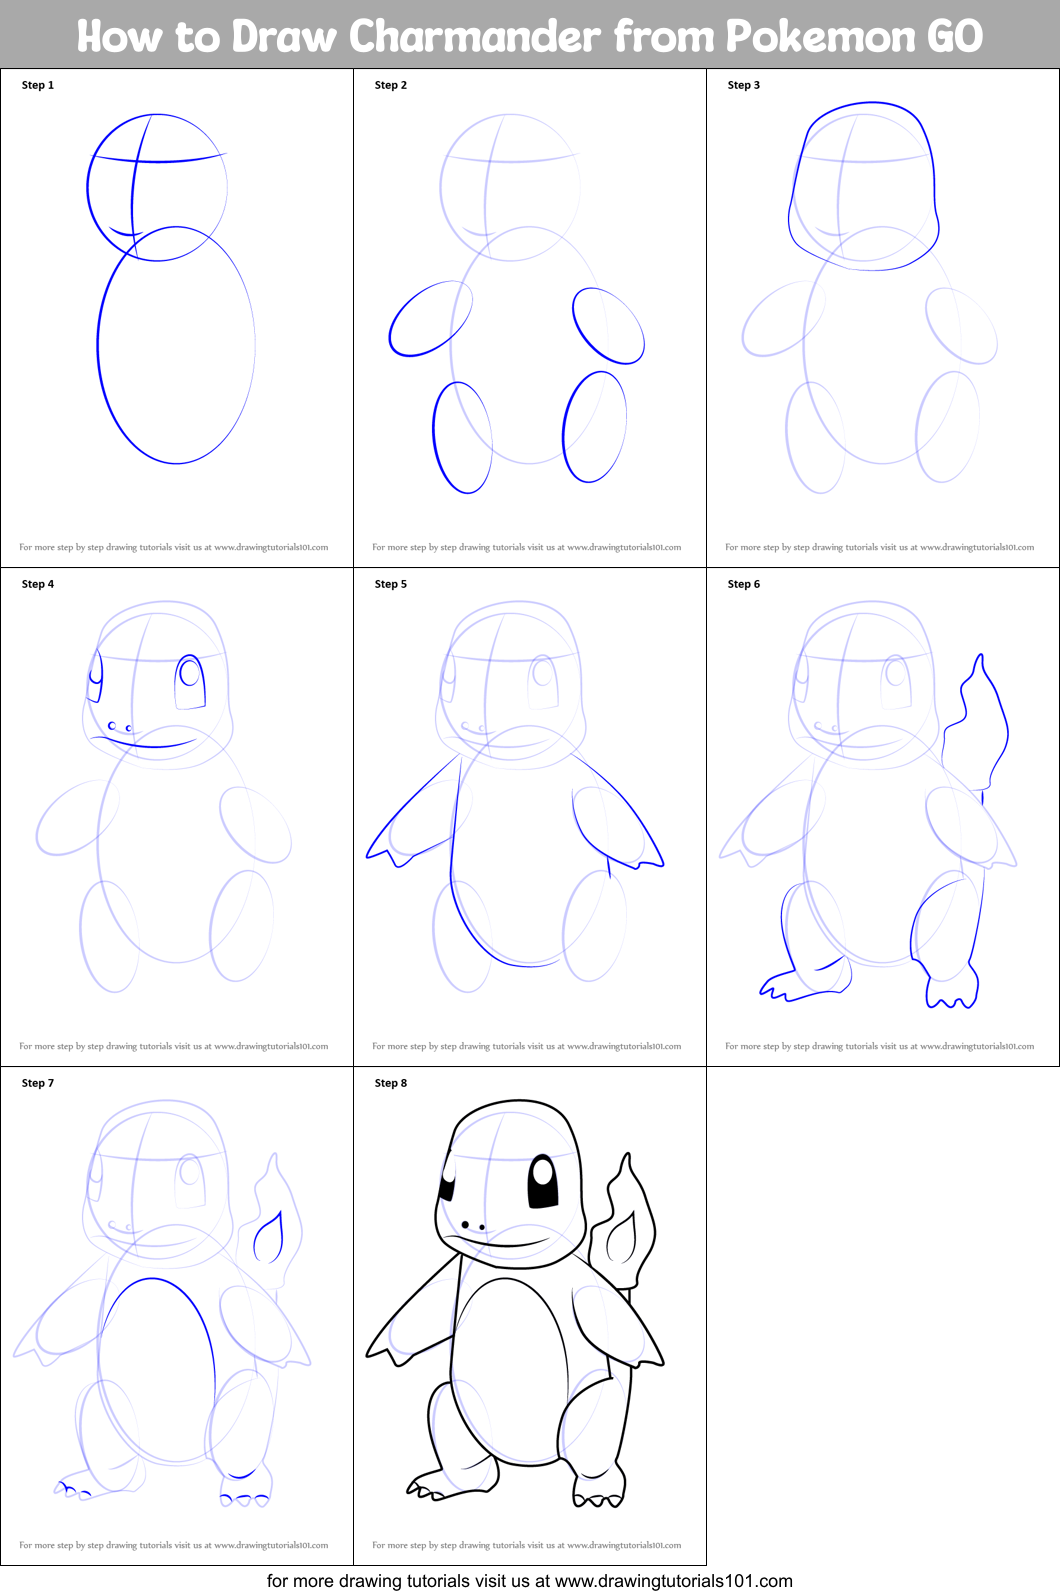 How to Draw Charmander from Pokemon GO printable step by step drawing